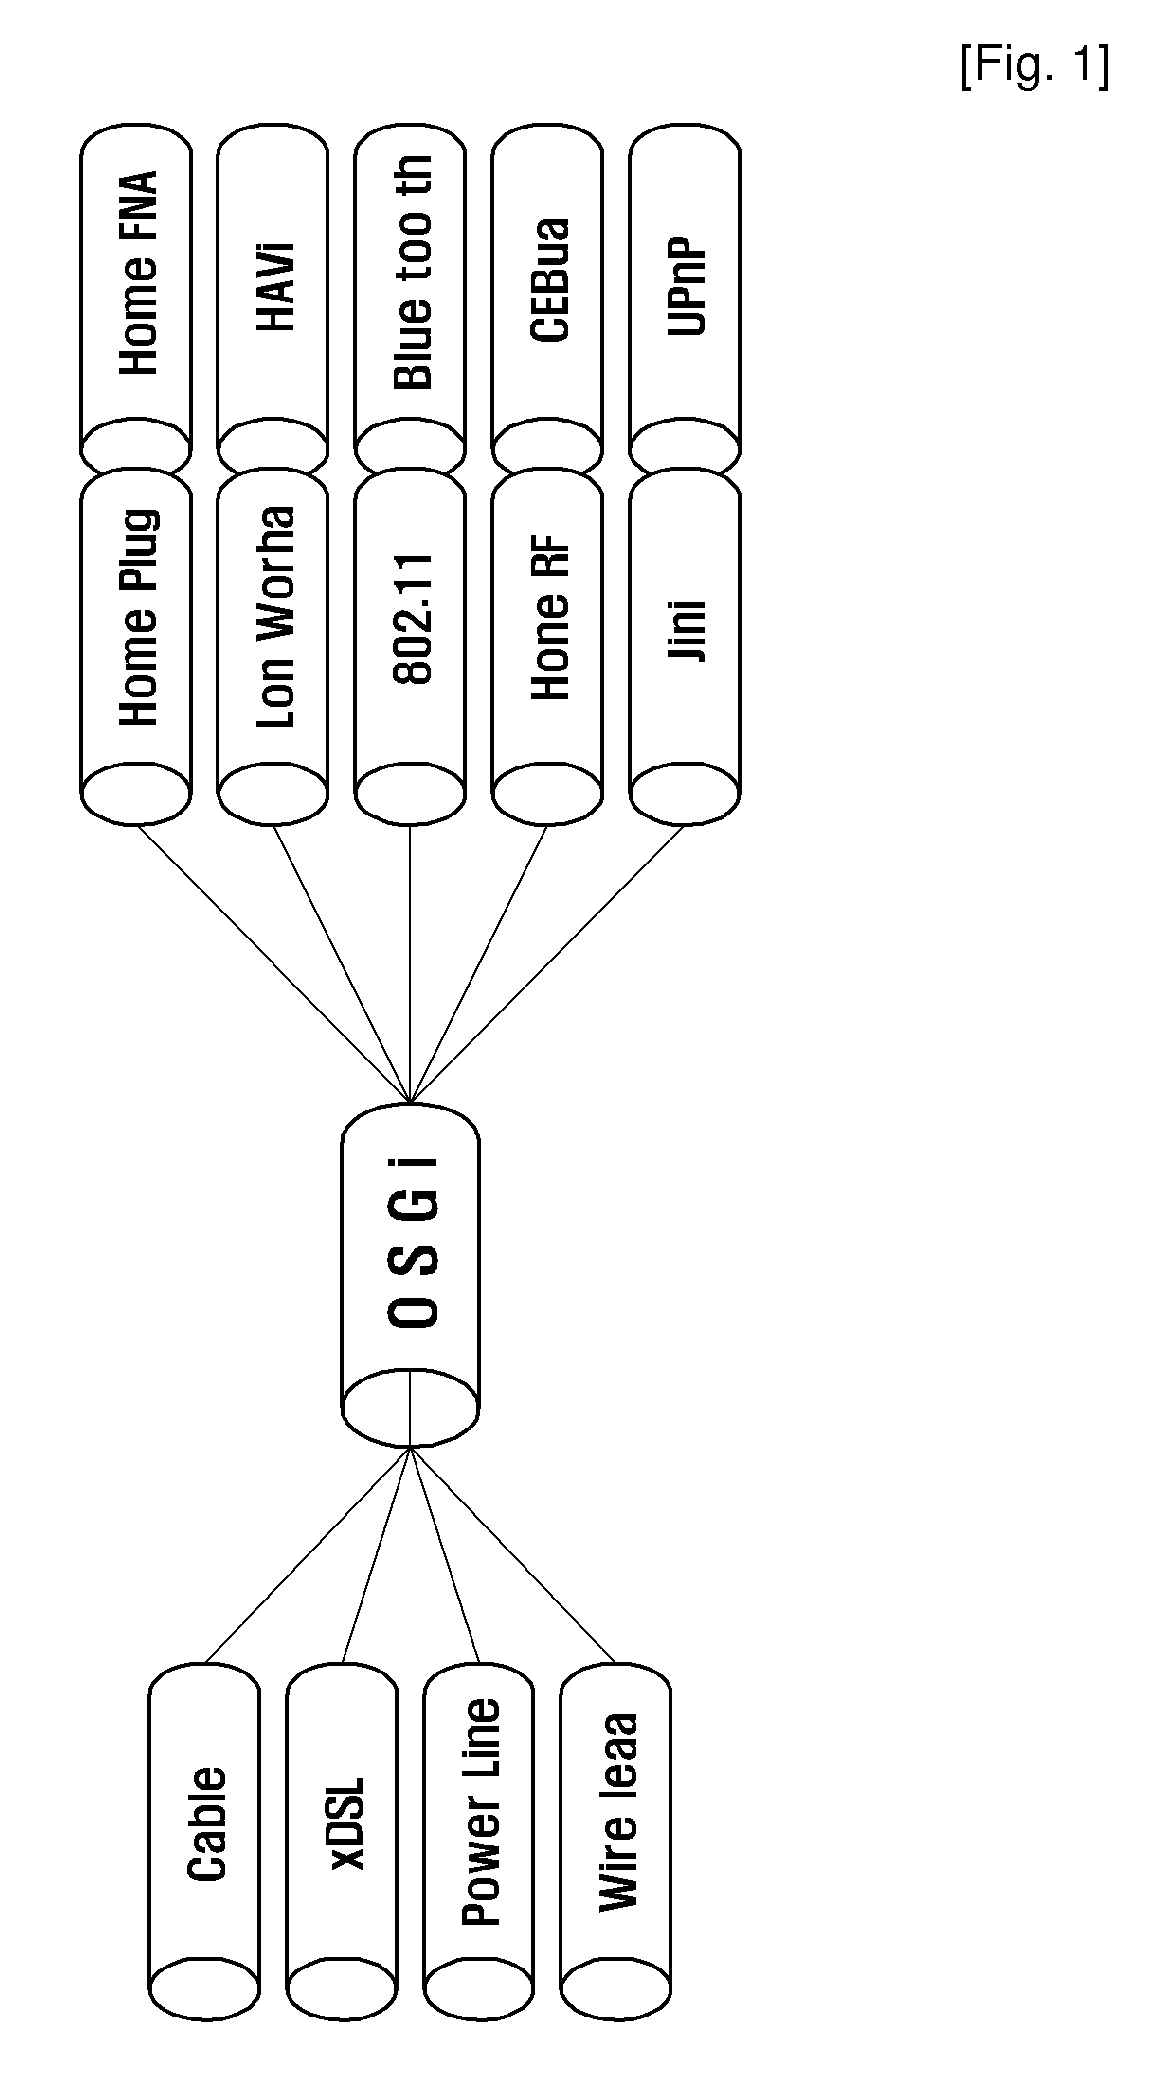 Residential Gateway System for Home Network Service